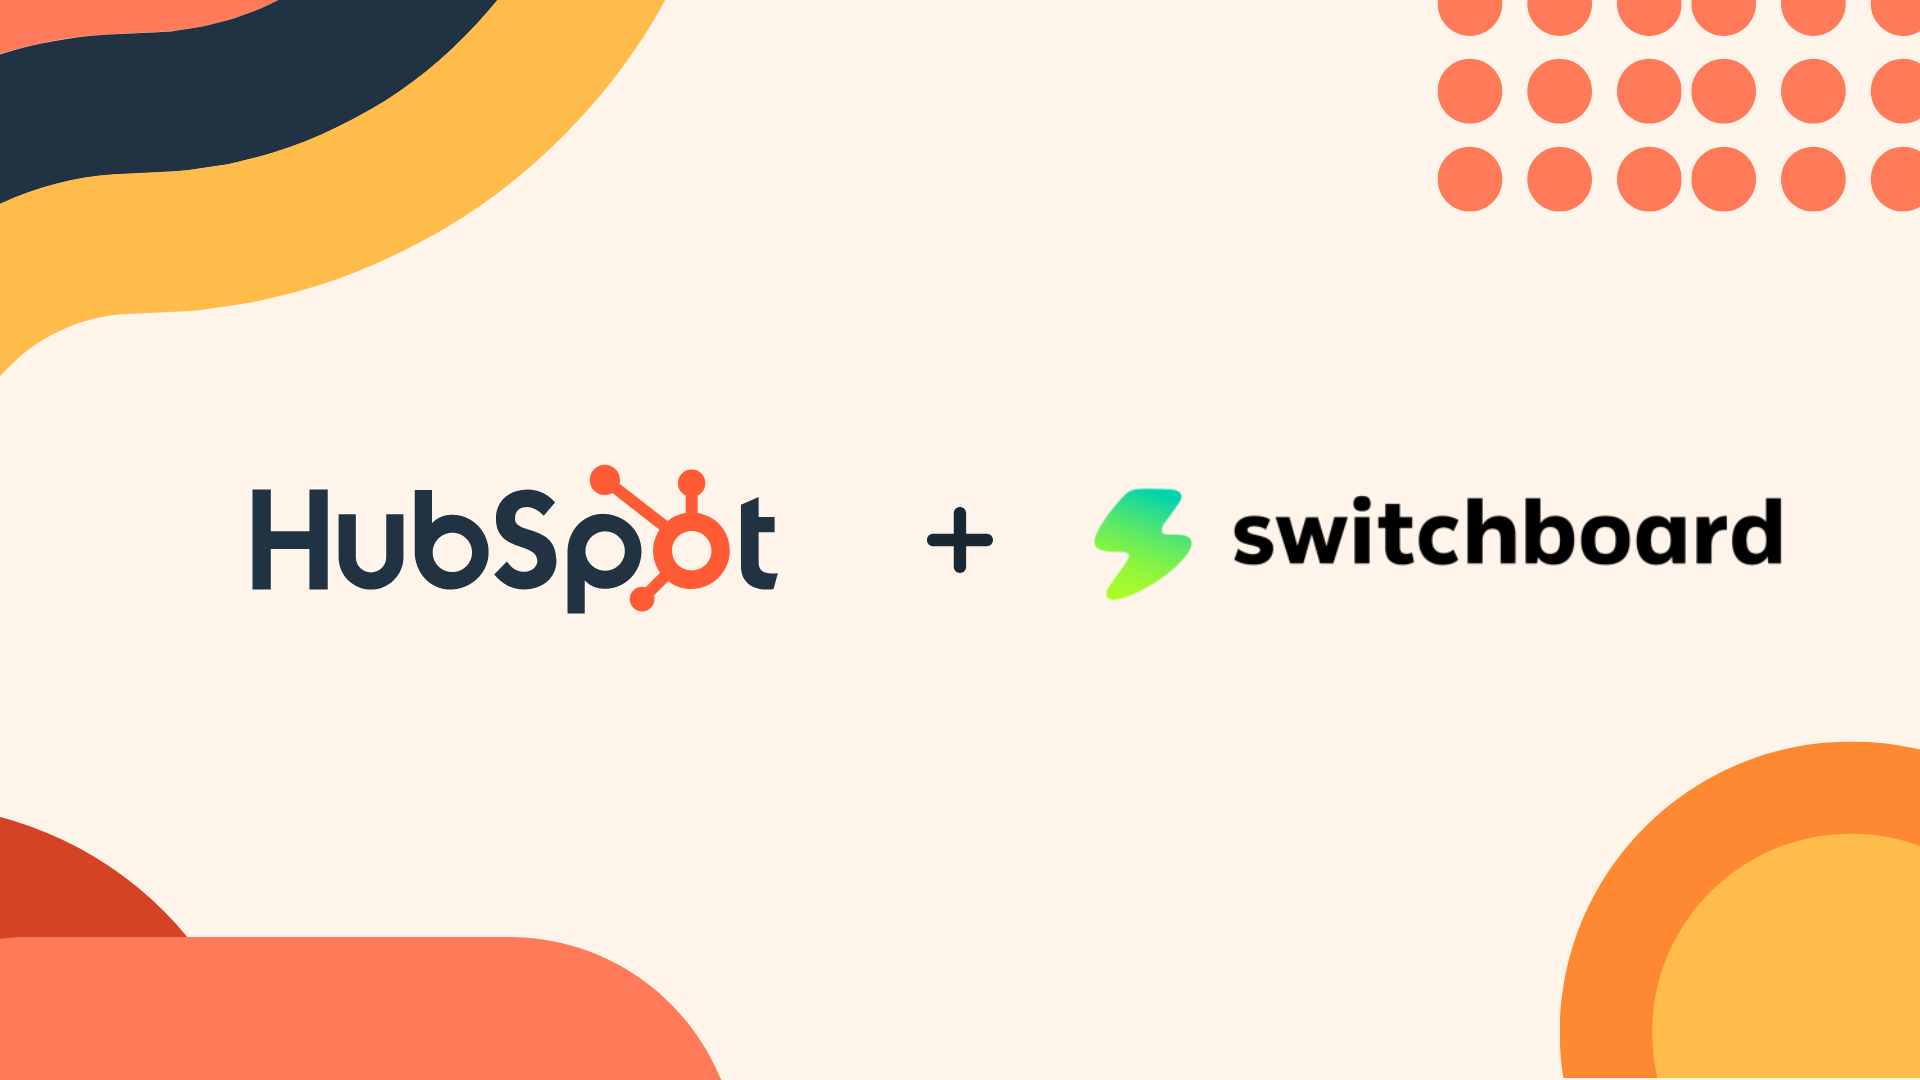 HubSpot Invests in Switchboard to Support More Connected Collaboration for Hybrid Teams